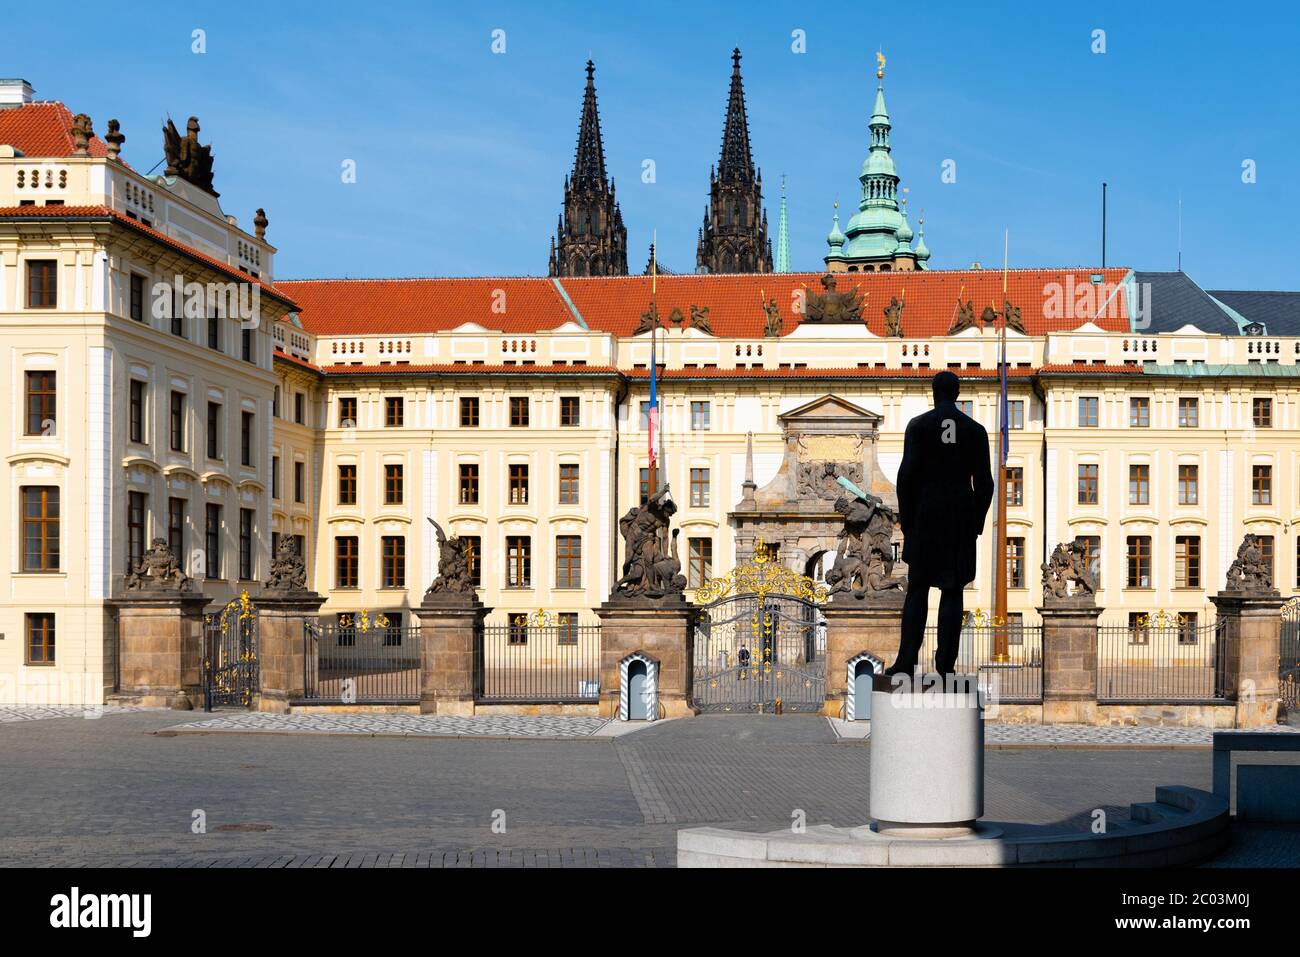 Hradcany square with entrance gate to Prague Castle and statue of Tomas Garrigue Masaryk - the first President of Czechoslovakia, Praha, Czech Republic. Stock Photo